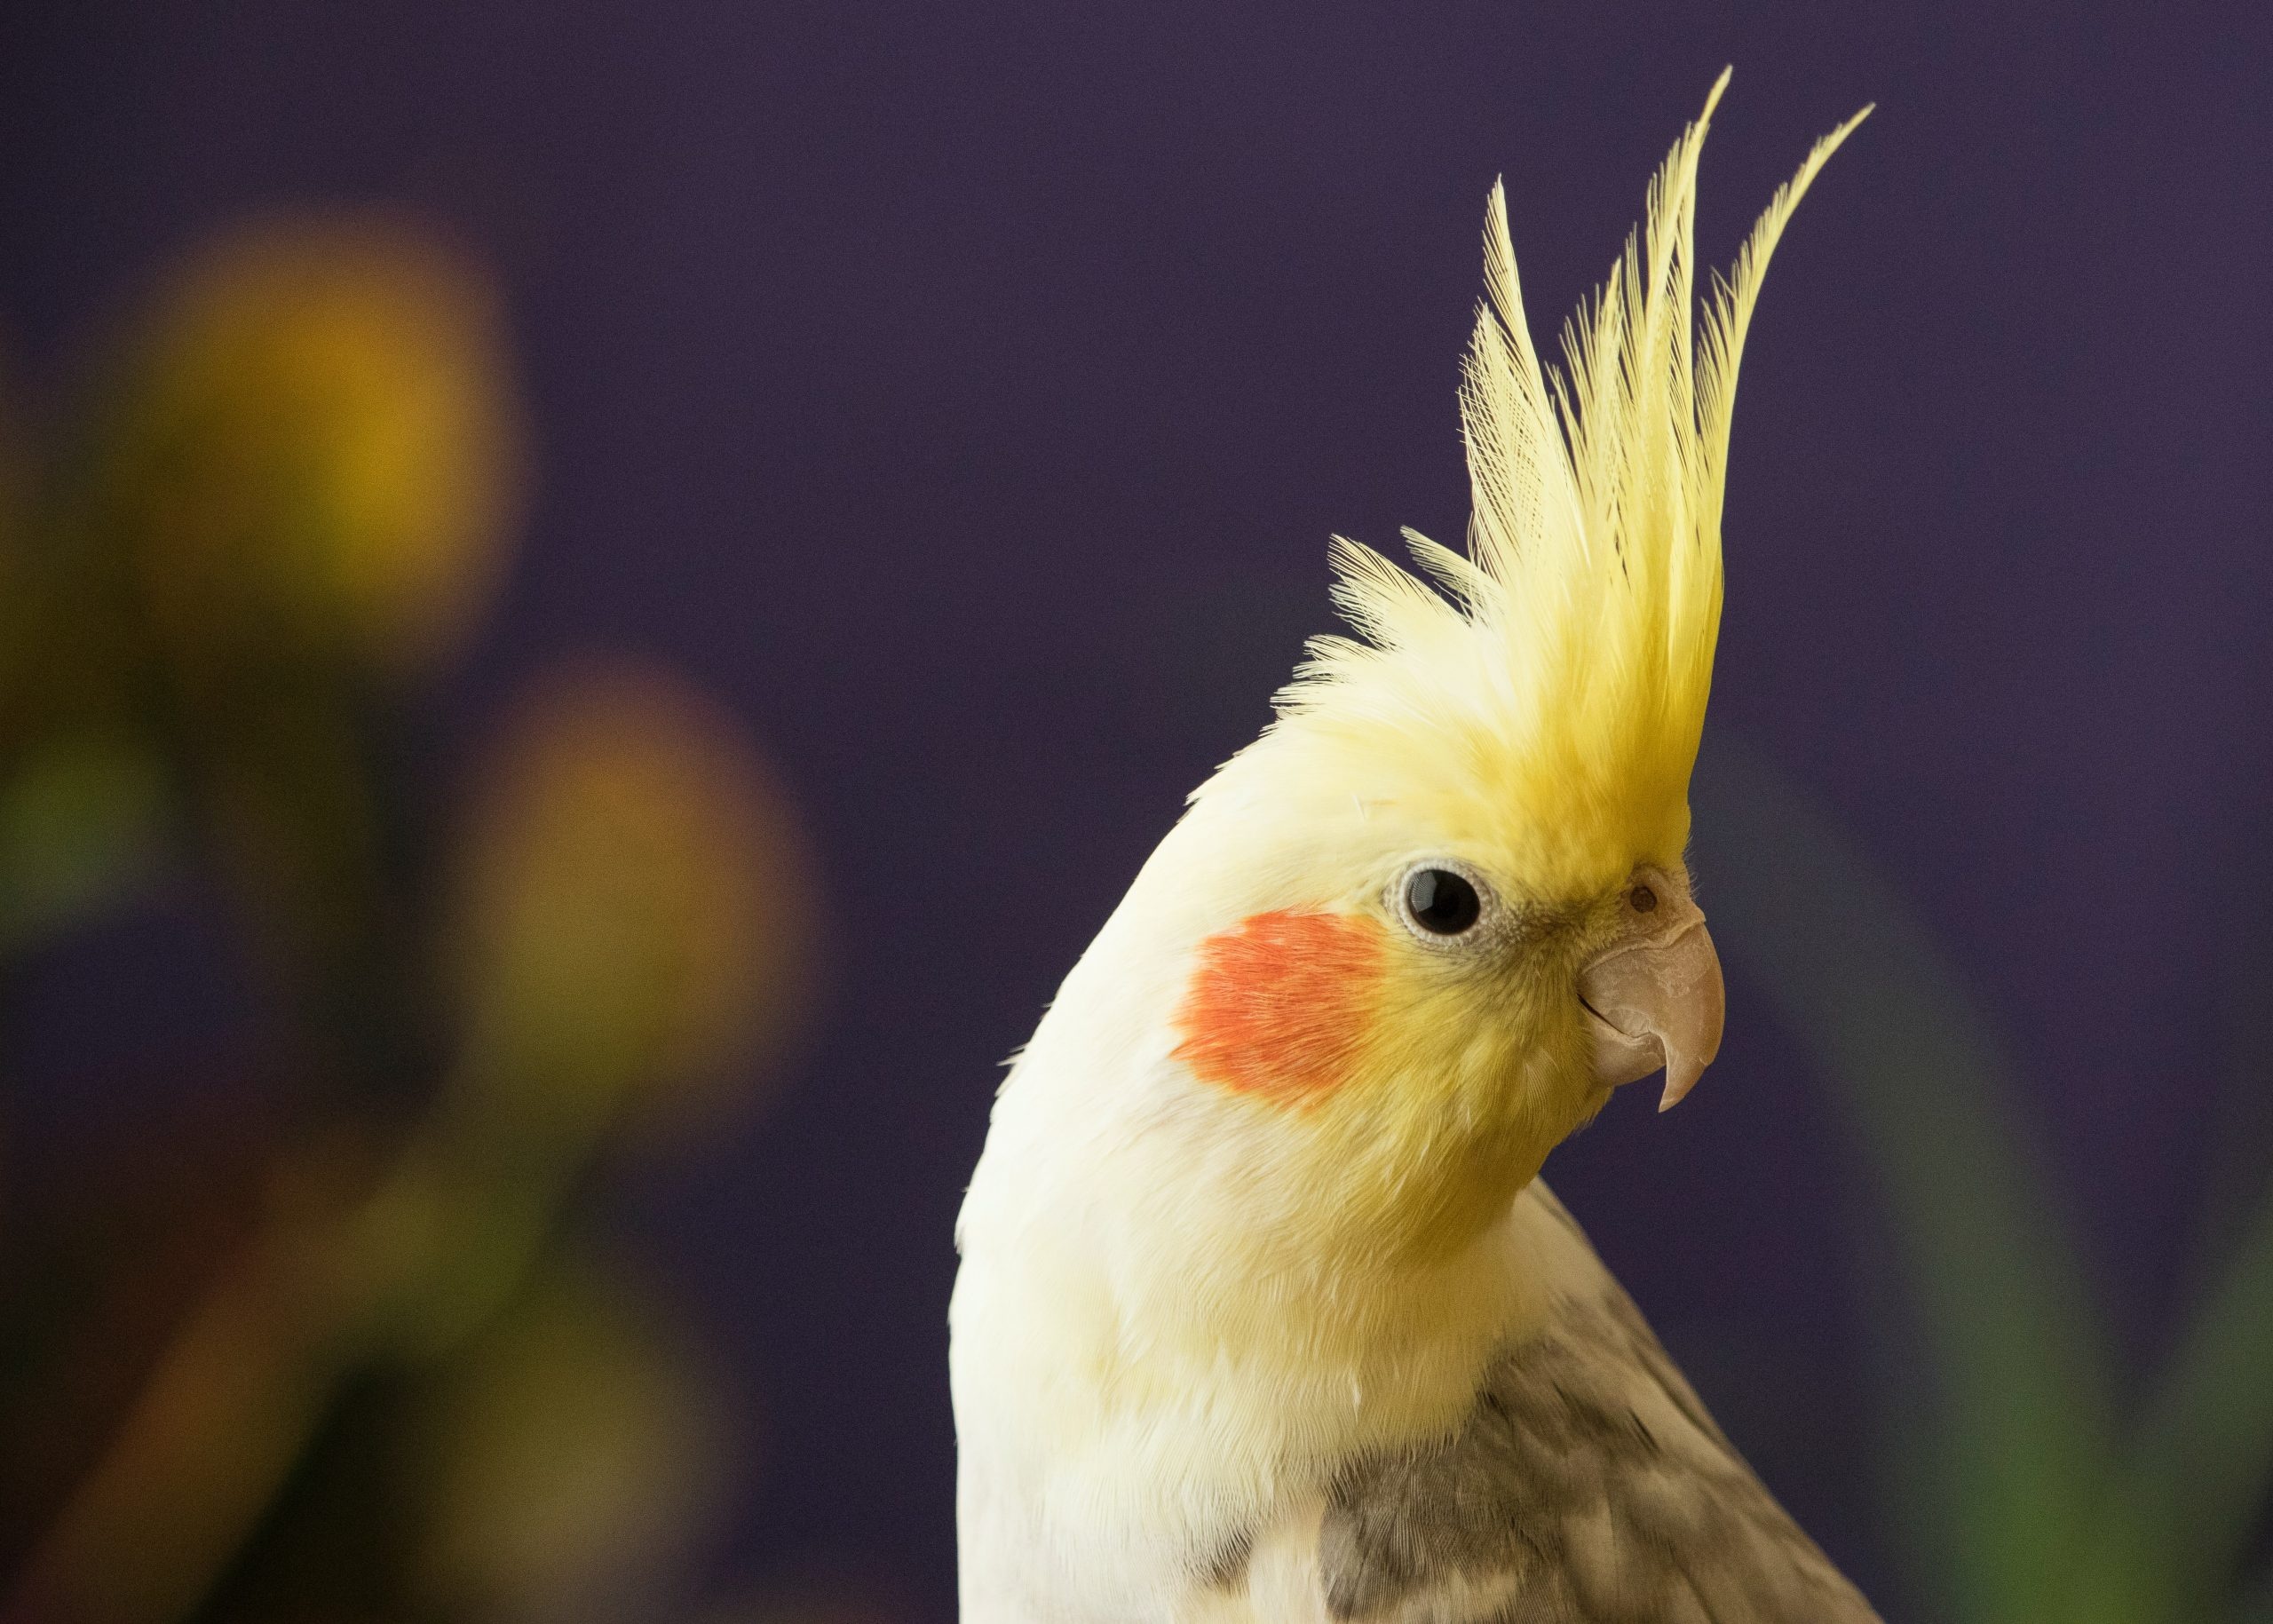 Happy cockatiel sale, Discounted feathered friends, Cheerful avian buddies, Affordable pet birds, 2560x1830 HD Desktop